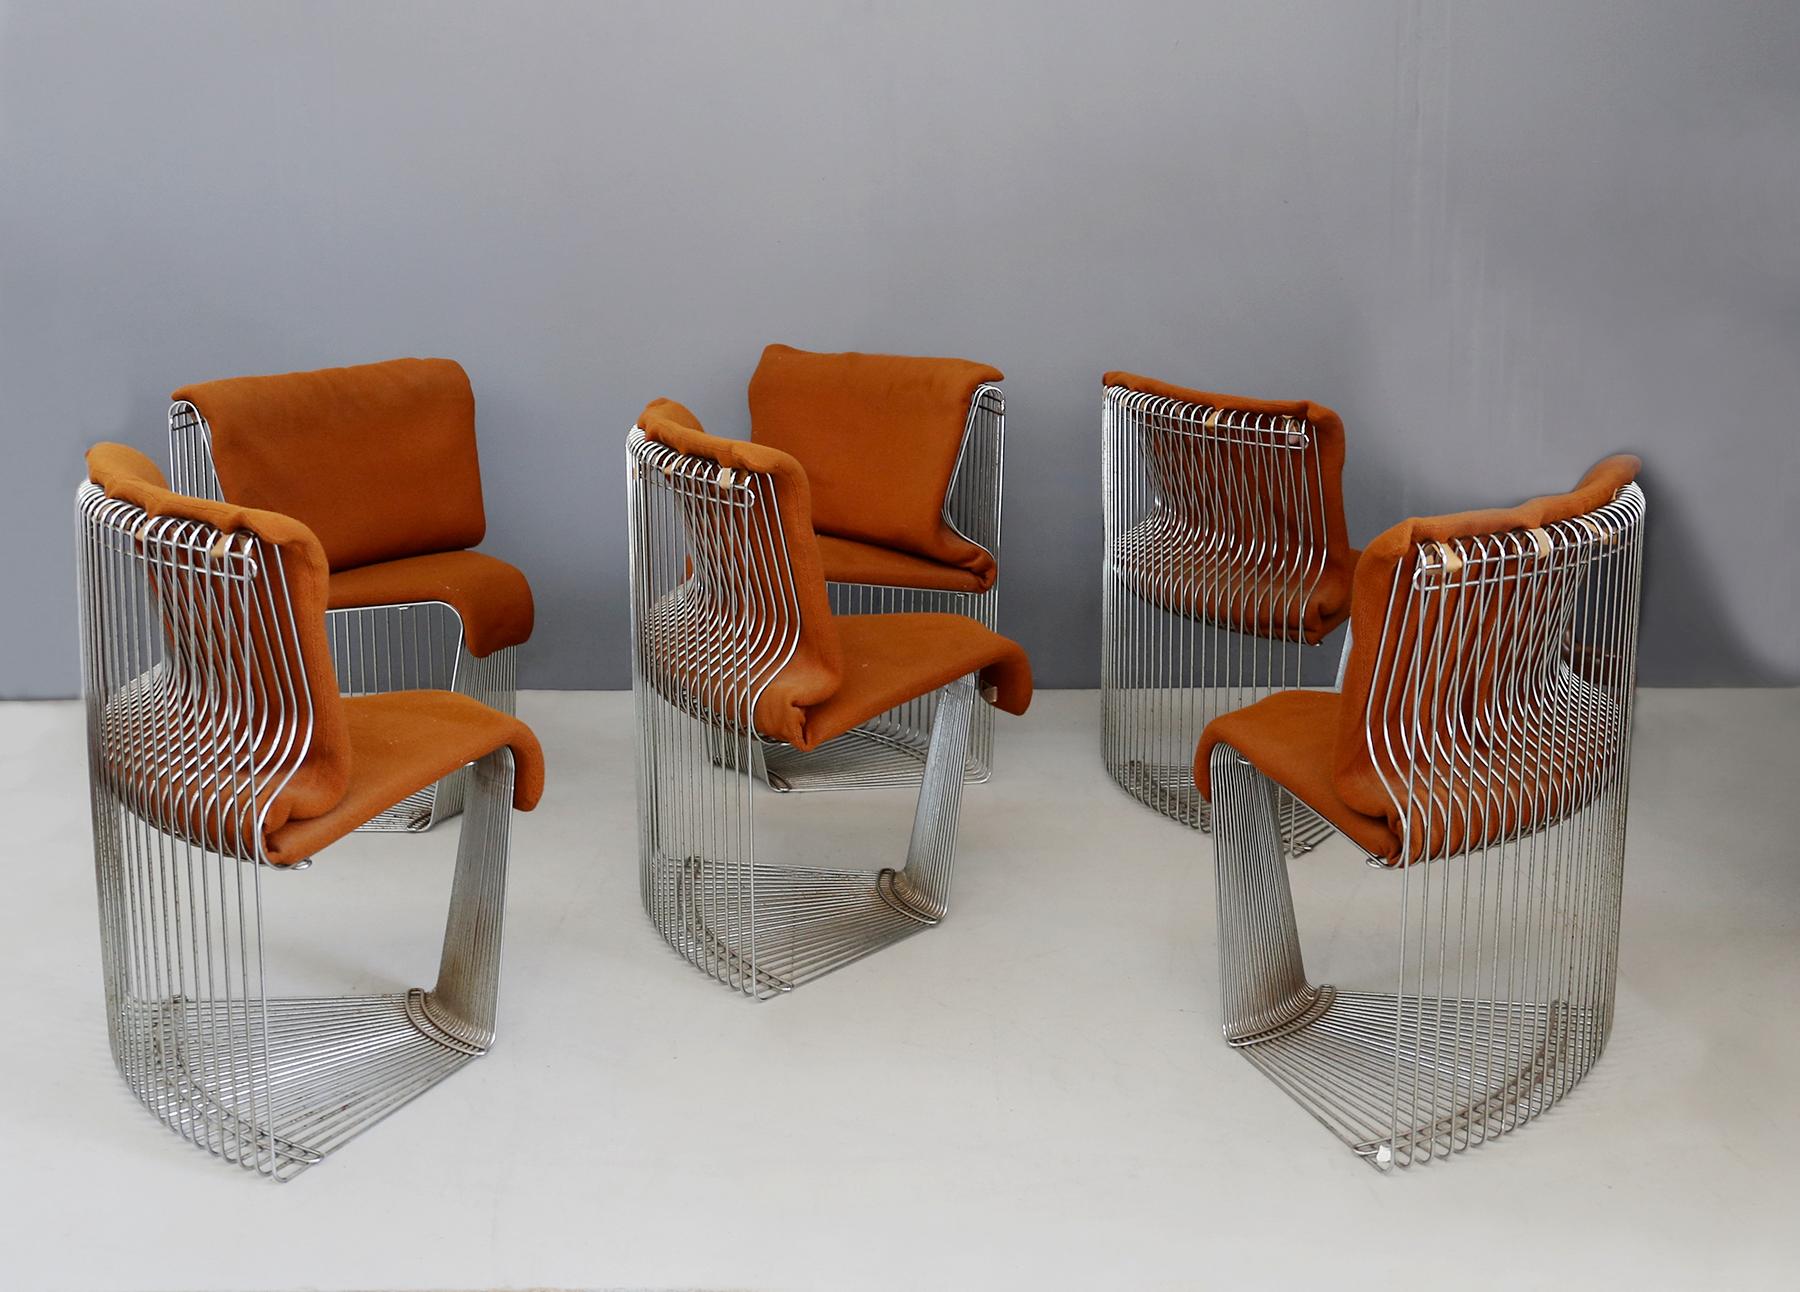 Complete set of 6 chairs and table by Verner Panton Pantanova series for the manufacture Fritz Hansen of 1971. The furniture was designed for the restaurant Varna - Denmark.
The table structure is made of parallel bar metal wire with open sides.
The